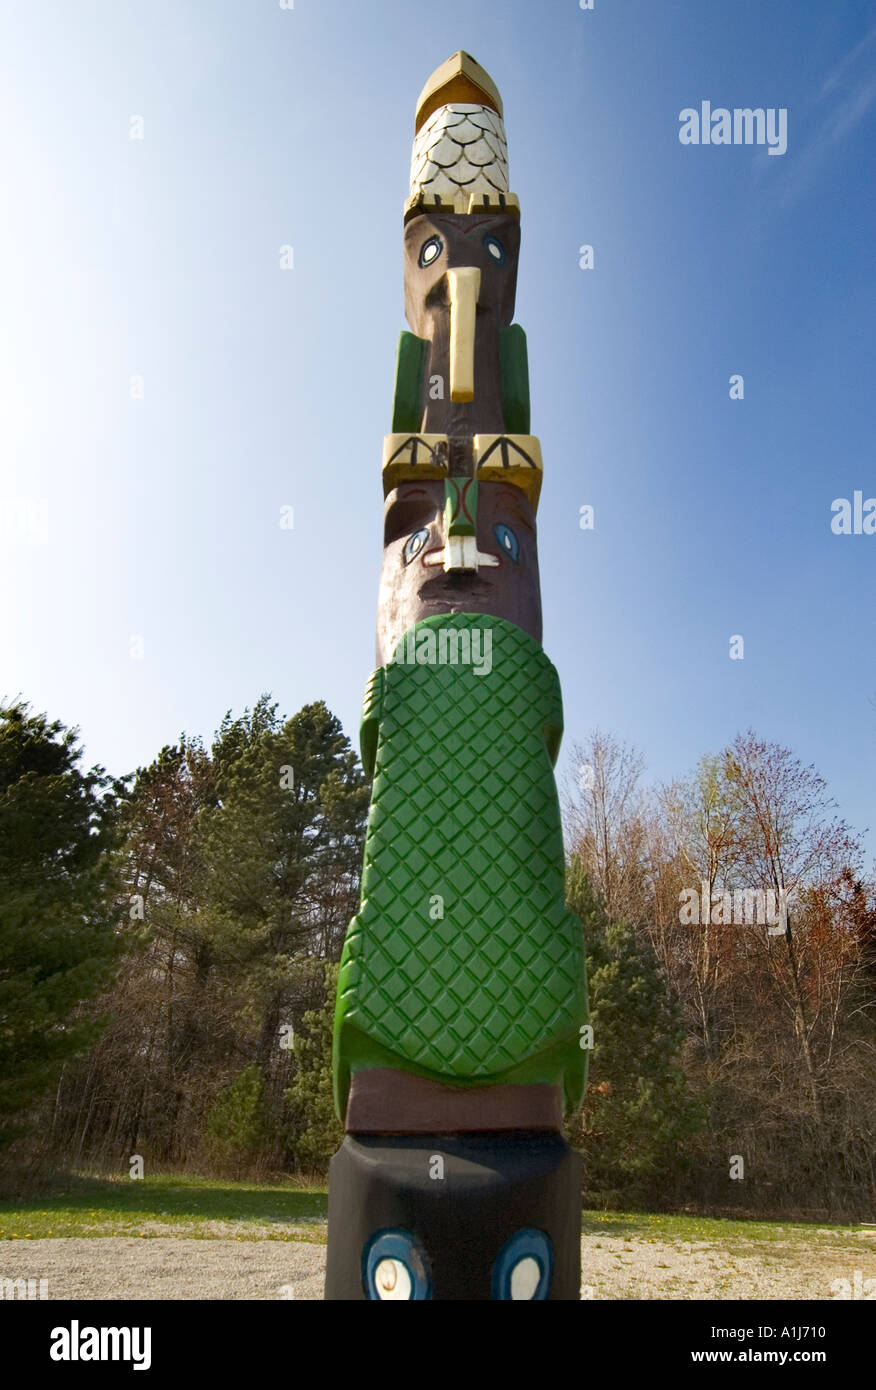 American Chippewa Indian tribe totem pole located in Port Huron Michigan tribal grounds Stock Photo